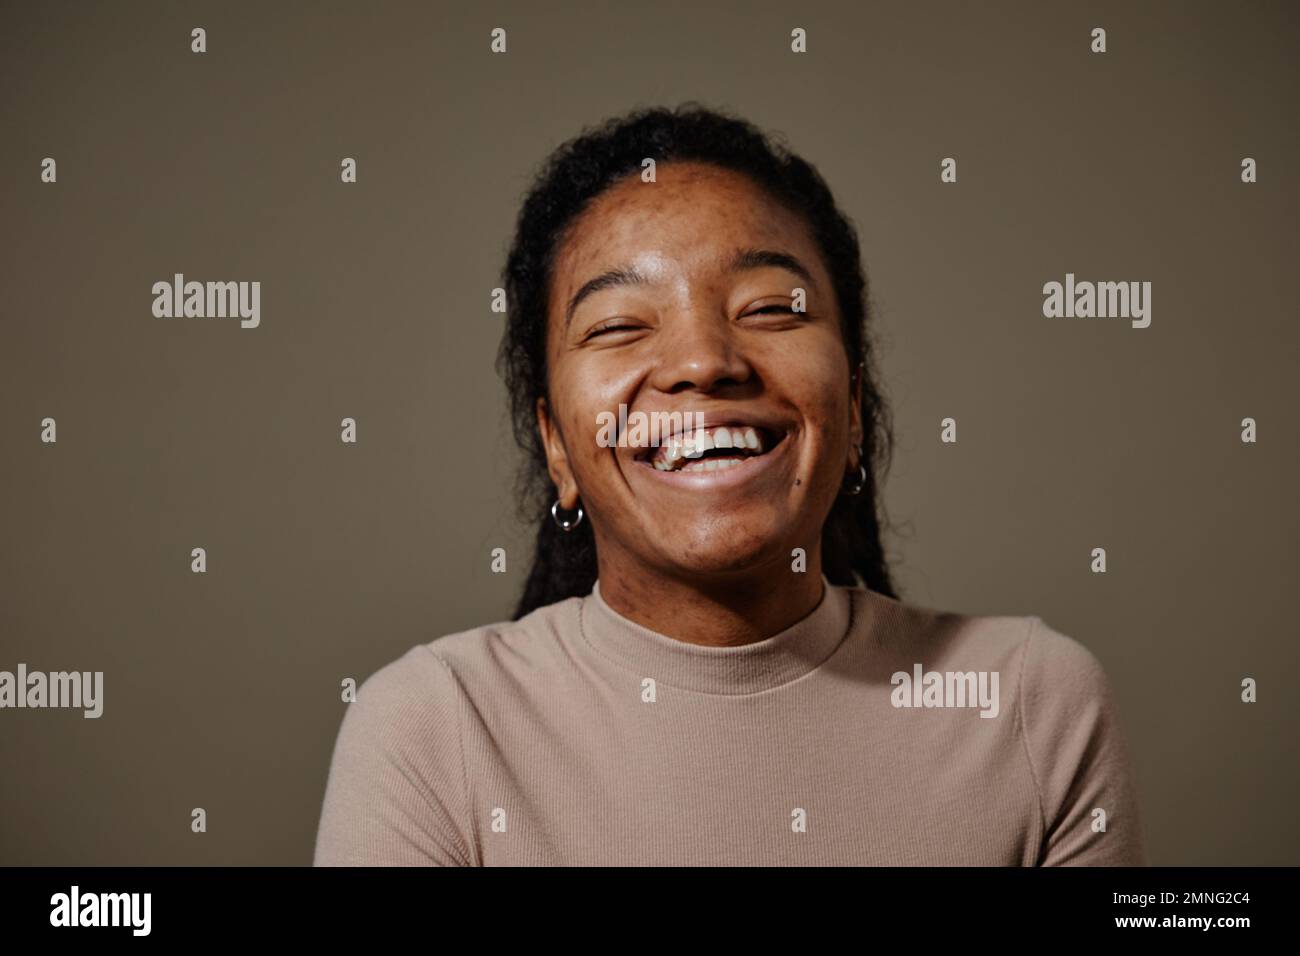 Candid portrait of black young woman laughing against neutral beige background in studio focus on skin texture Stock Photo